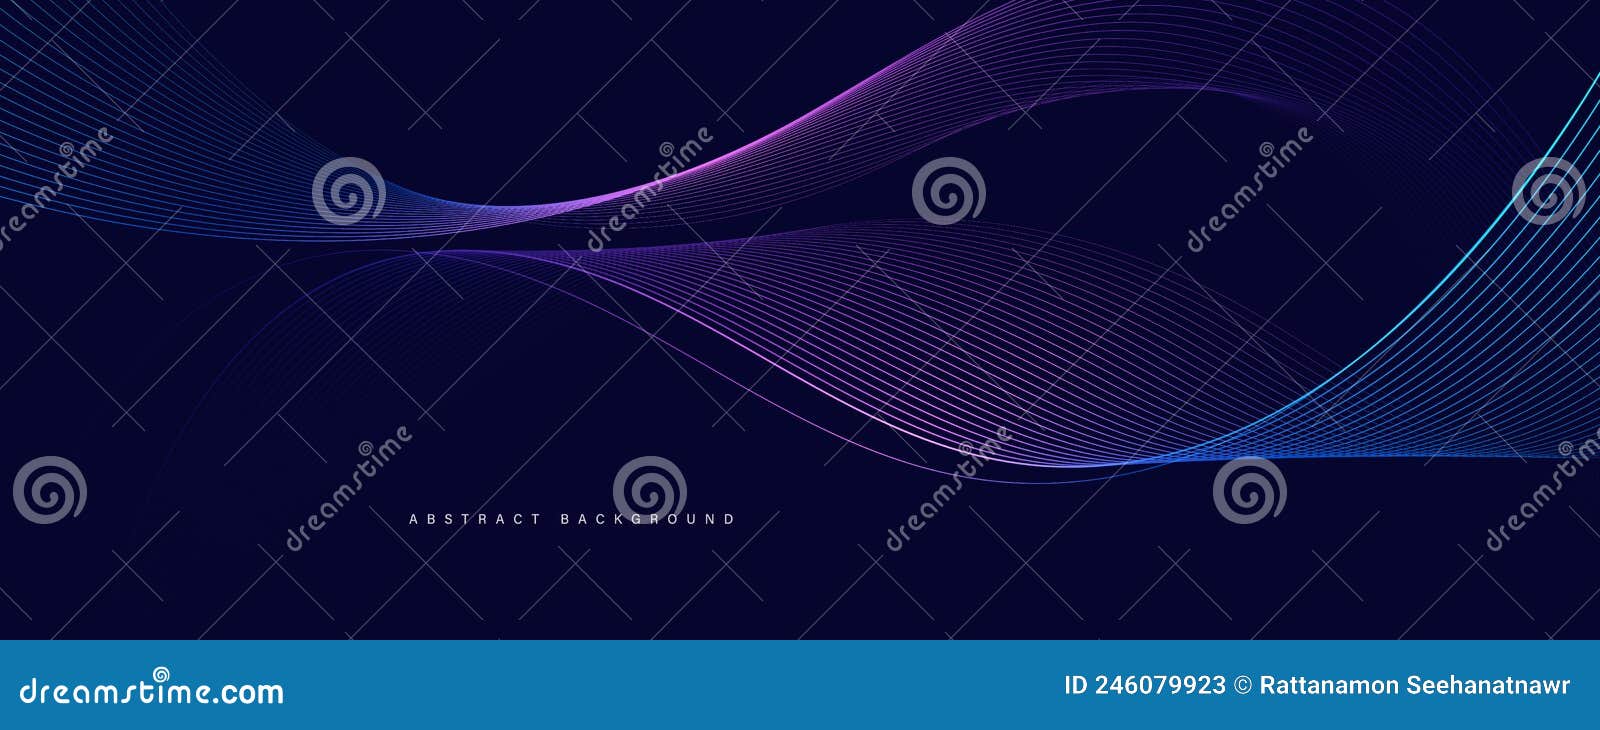 dark abstract background with glowing wave. shiny moving lines  . modern purple blue gradient flowing wave lines.